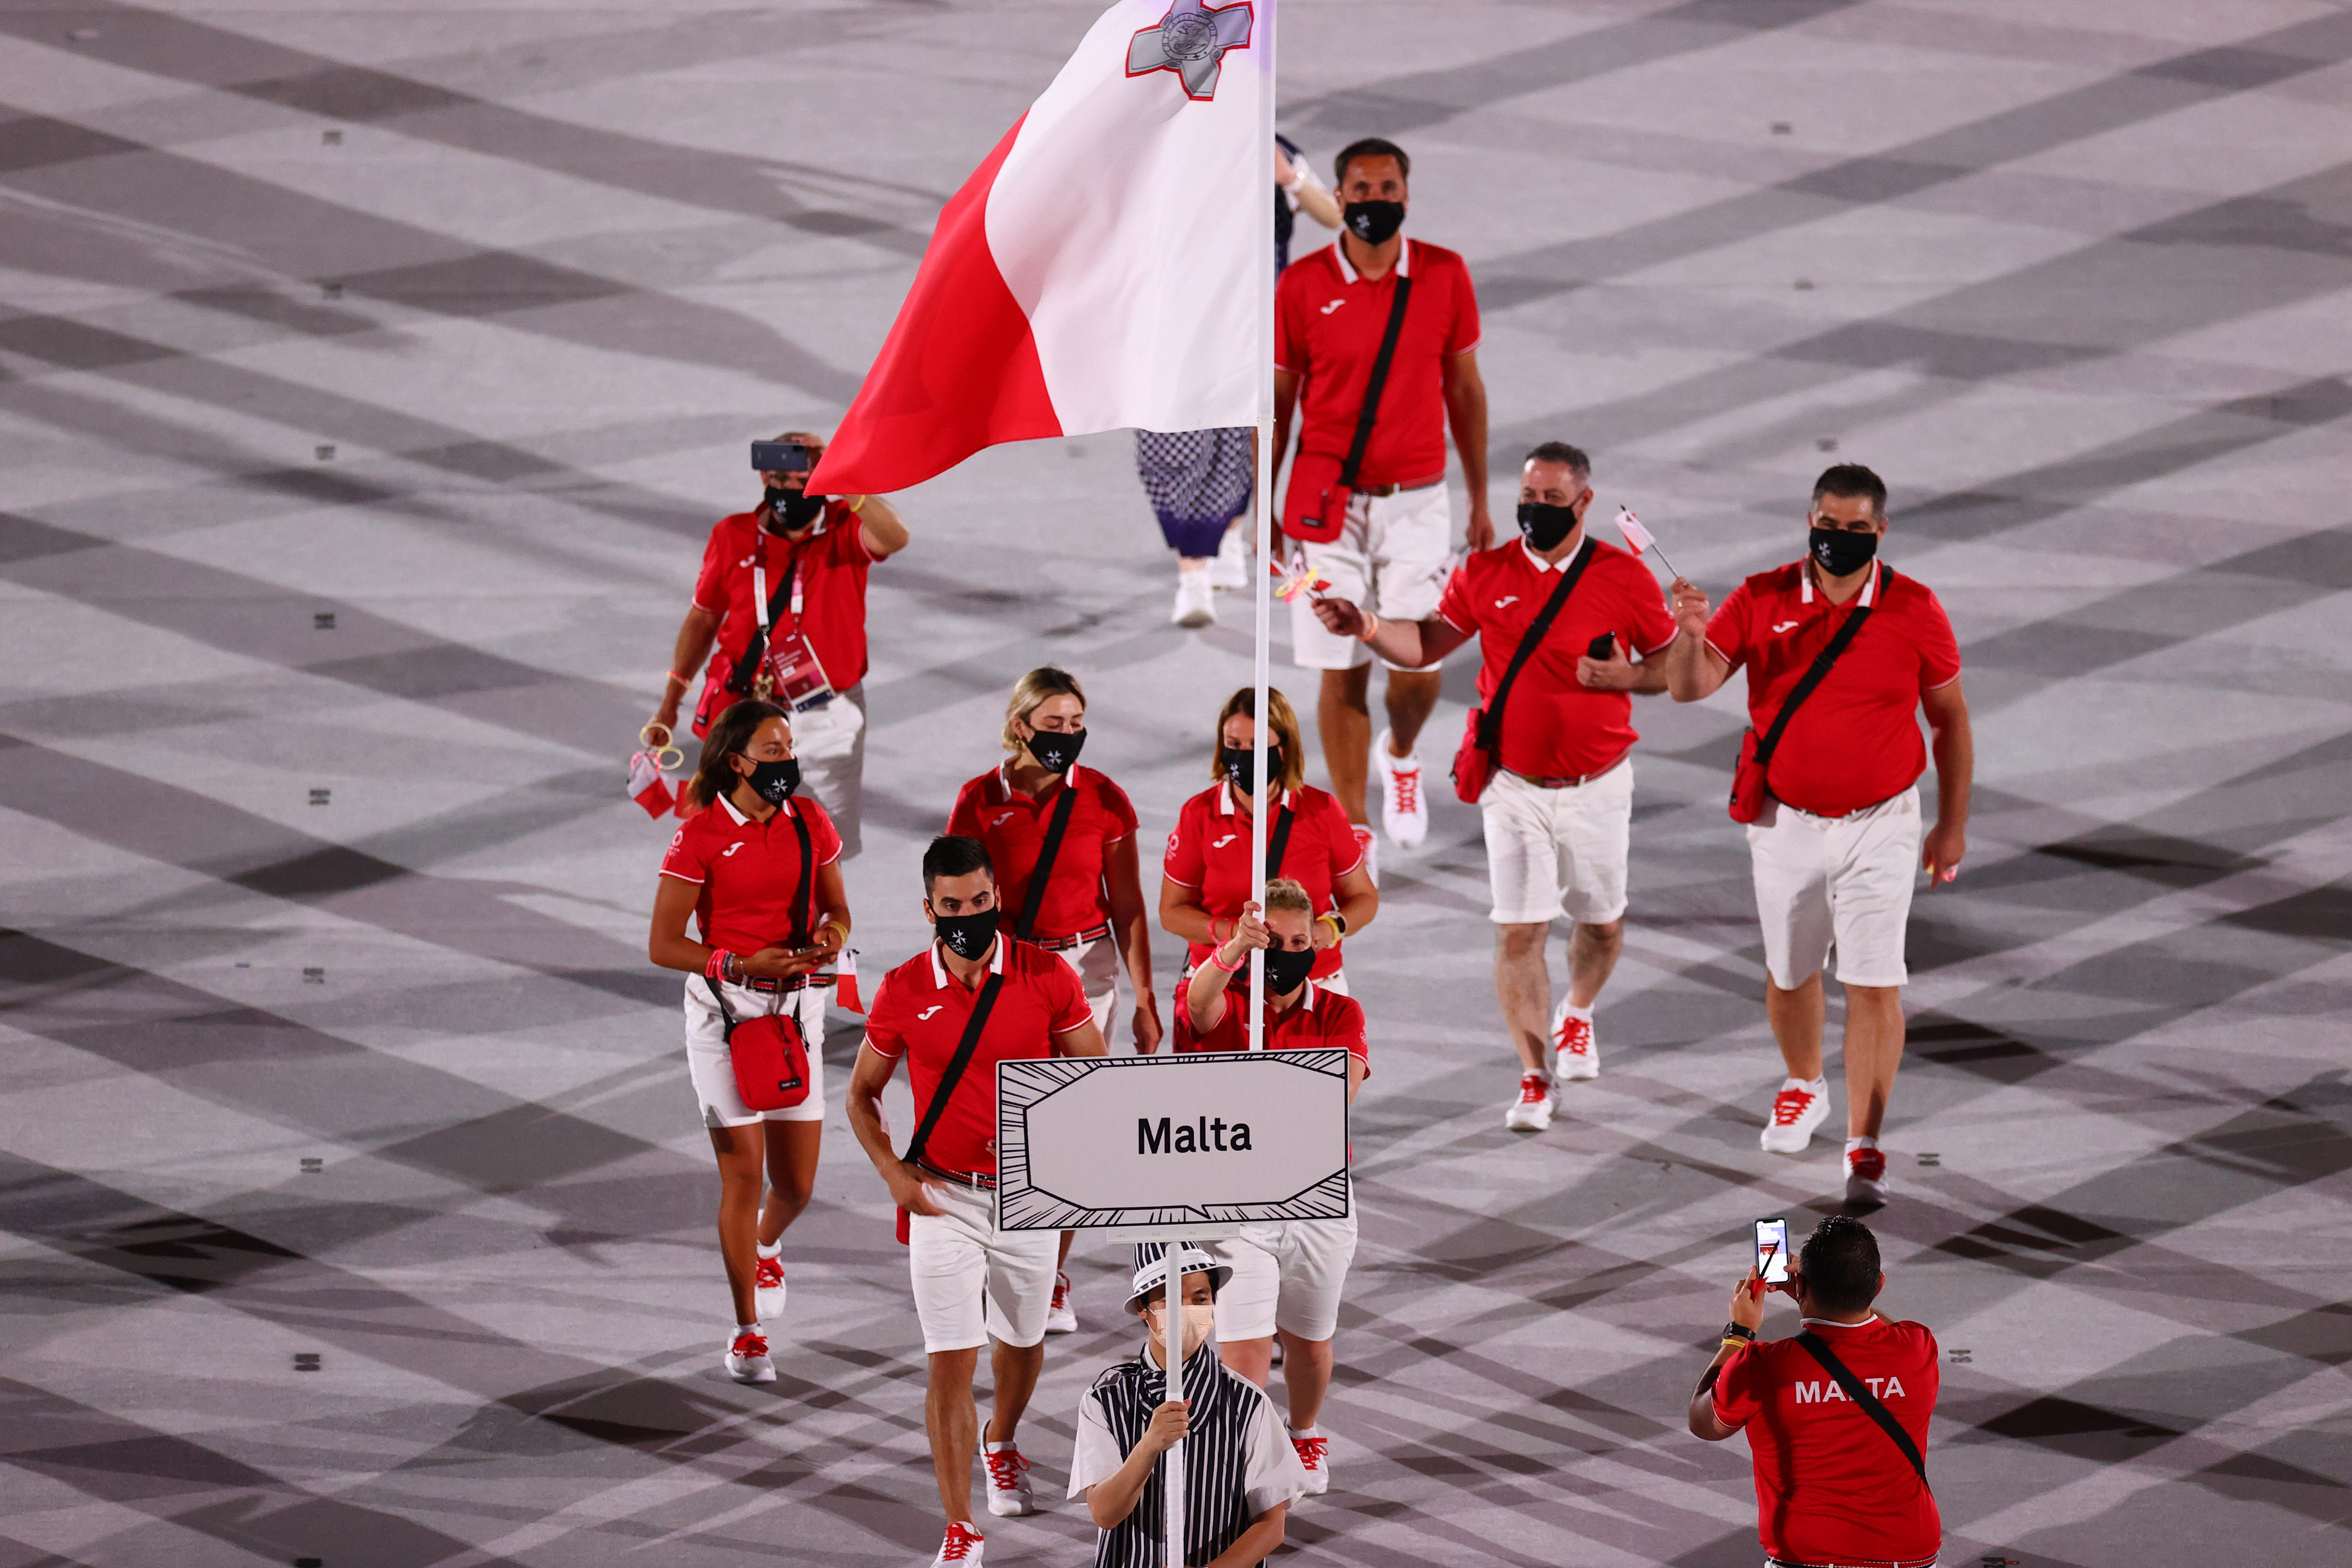 Tokyo 2020 Olympics - The Tokyo 2020 Olympics Opening Ceremony - Olympic Stadium, Tokyo, Japan - July 23, 2021. Flag bearers Andrew Chetcuti of Malta and Eleanor Bezzina of Malta lead their contingent during the athletes parade at the opening ceremony REUTERS/Mike Blake